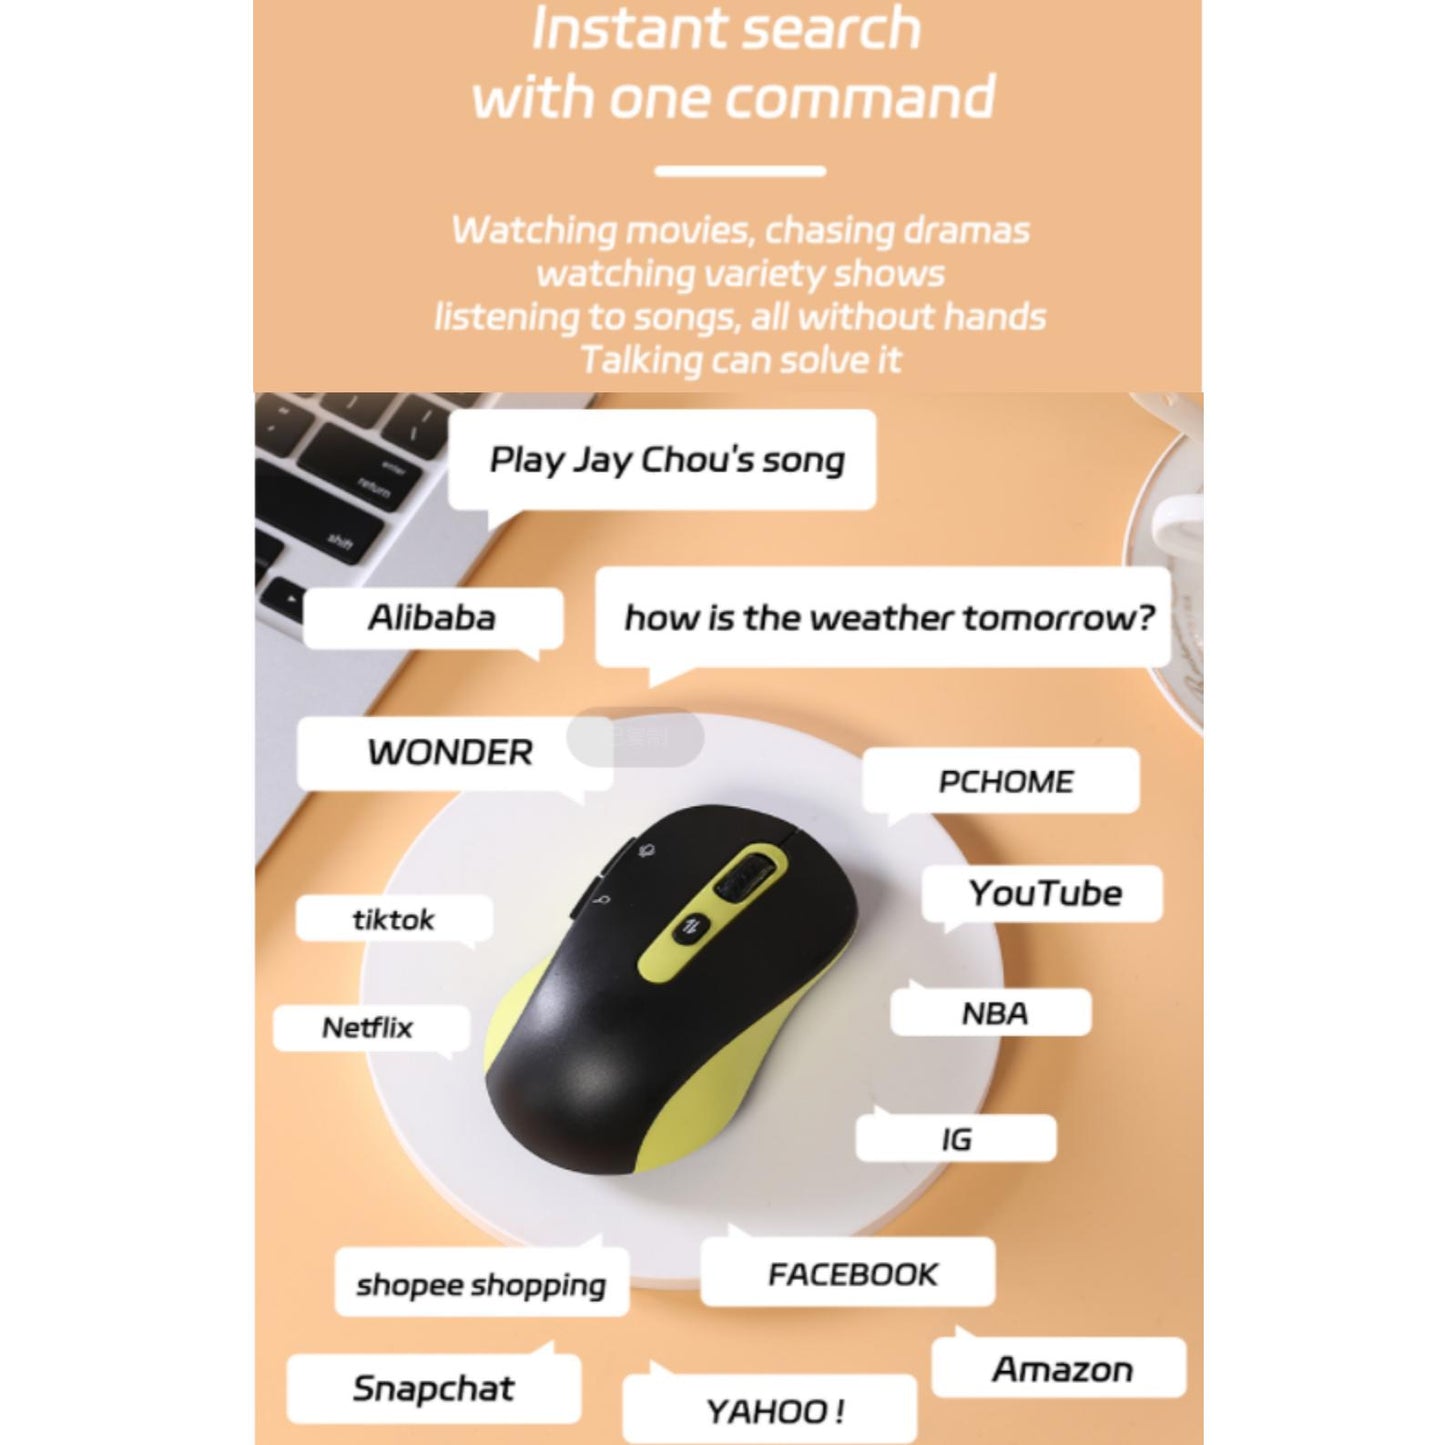 Ai typing mouse Talking mouse Translation mouse Ai mouse voice button function